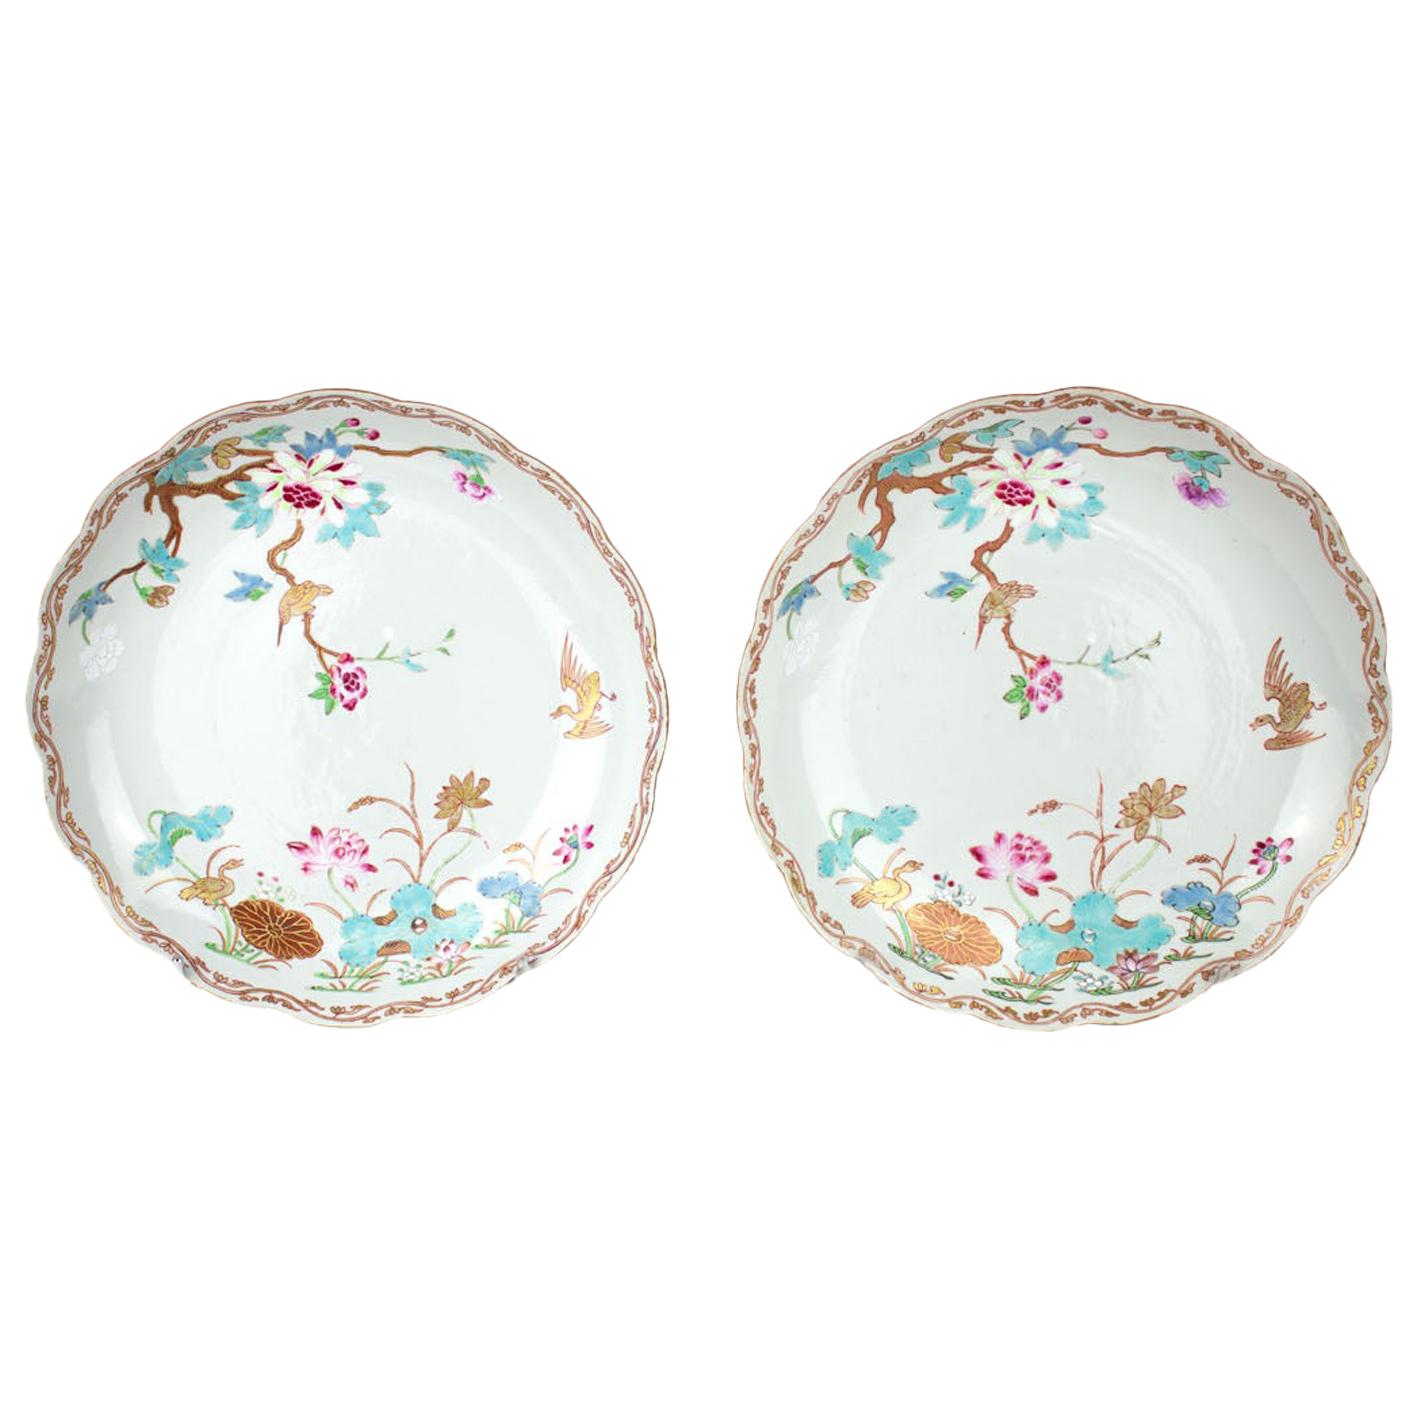 Chinese Export Porcelain Pair of Saucers, Qianlong, 1736-1795 For Sale